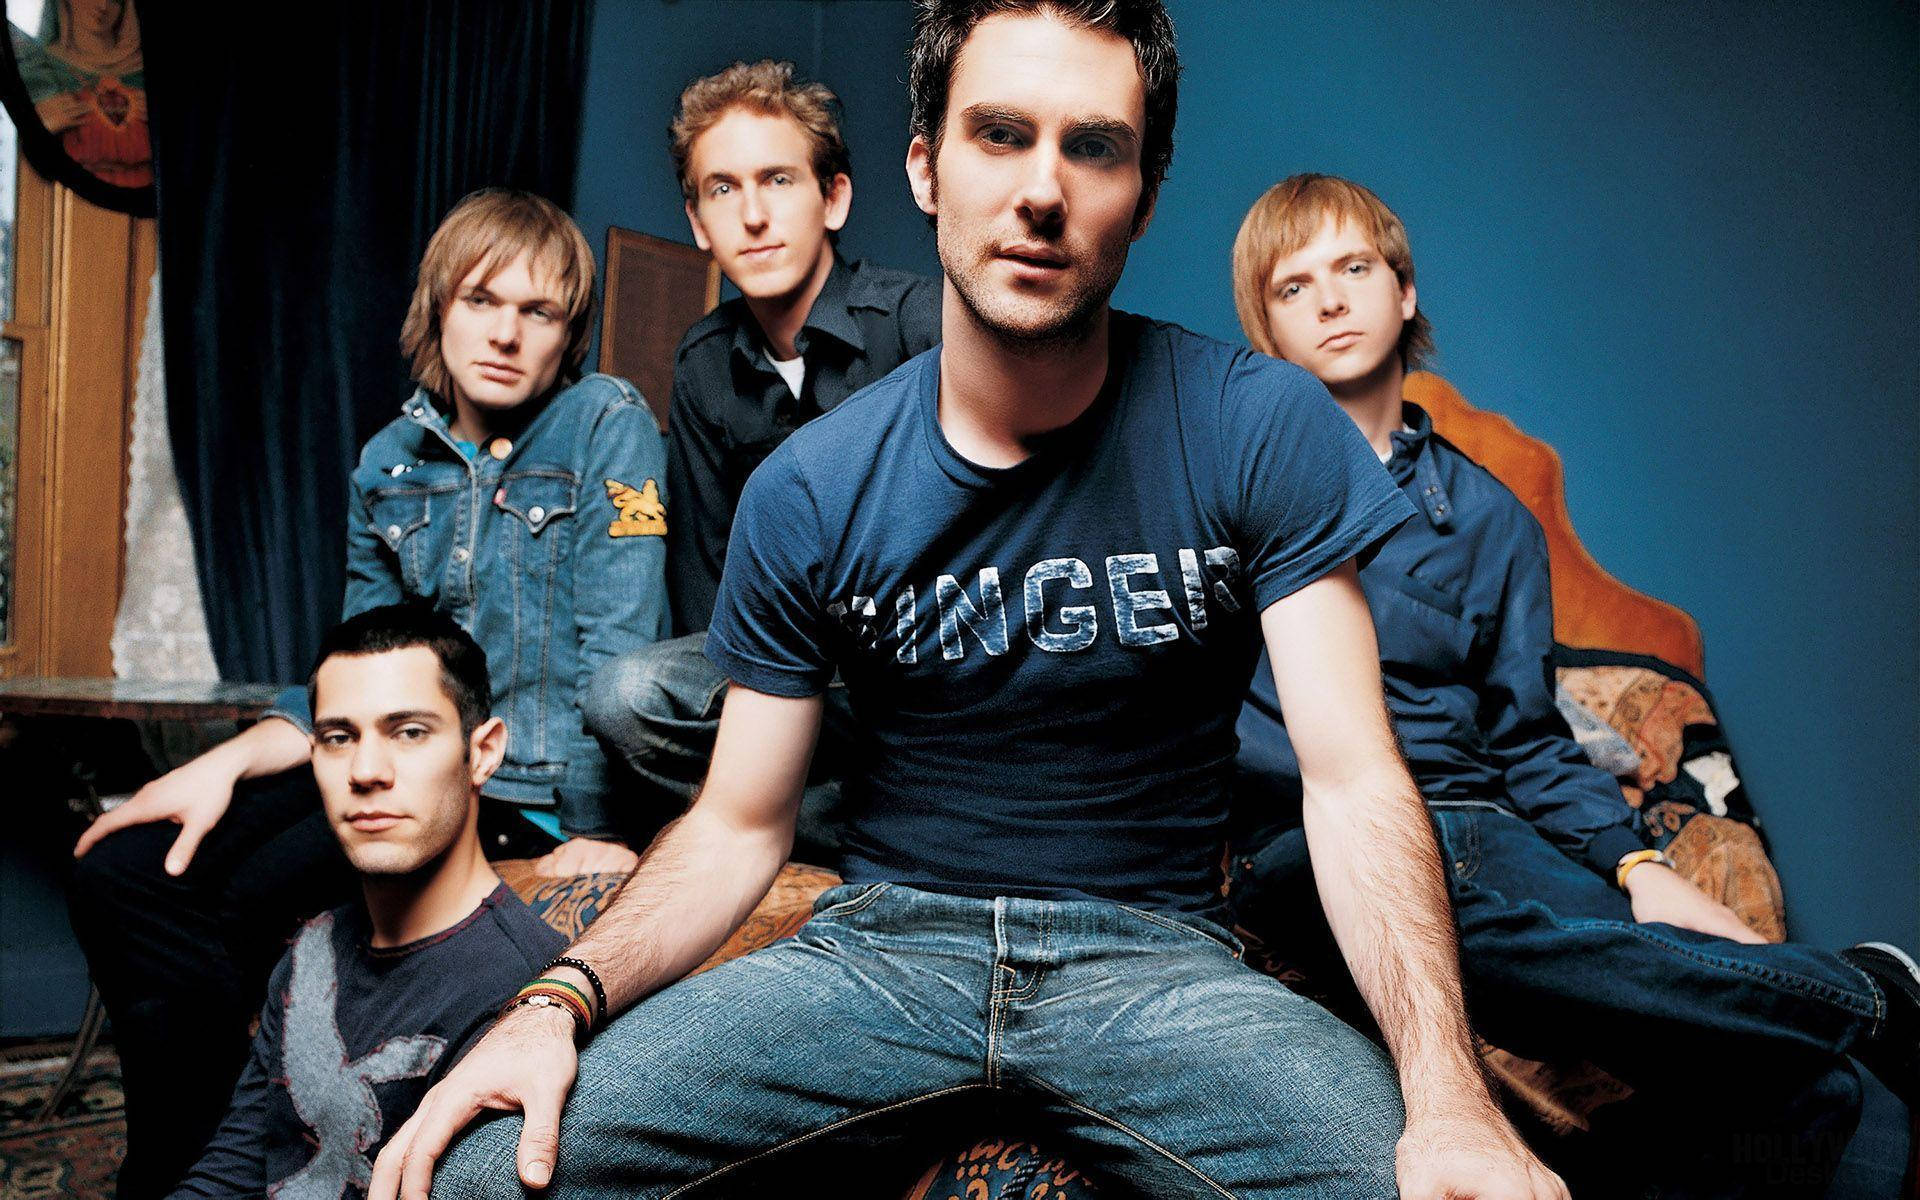 Caption: Maroon 5 Band Members In Blue Ensemble In A Blue Room